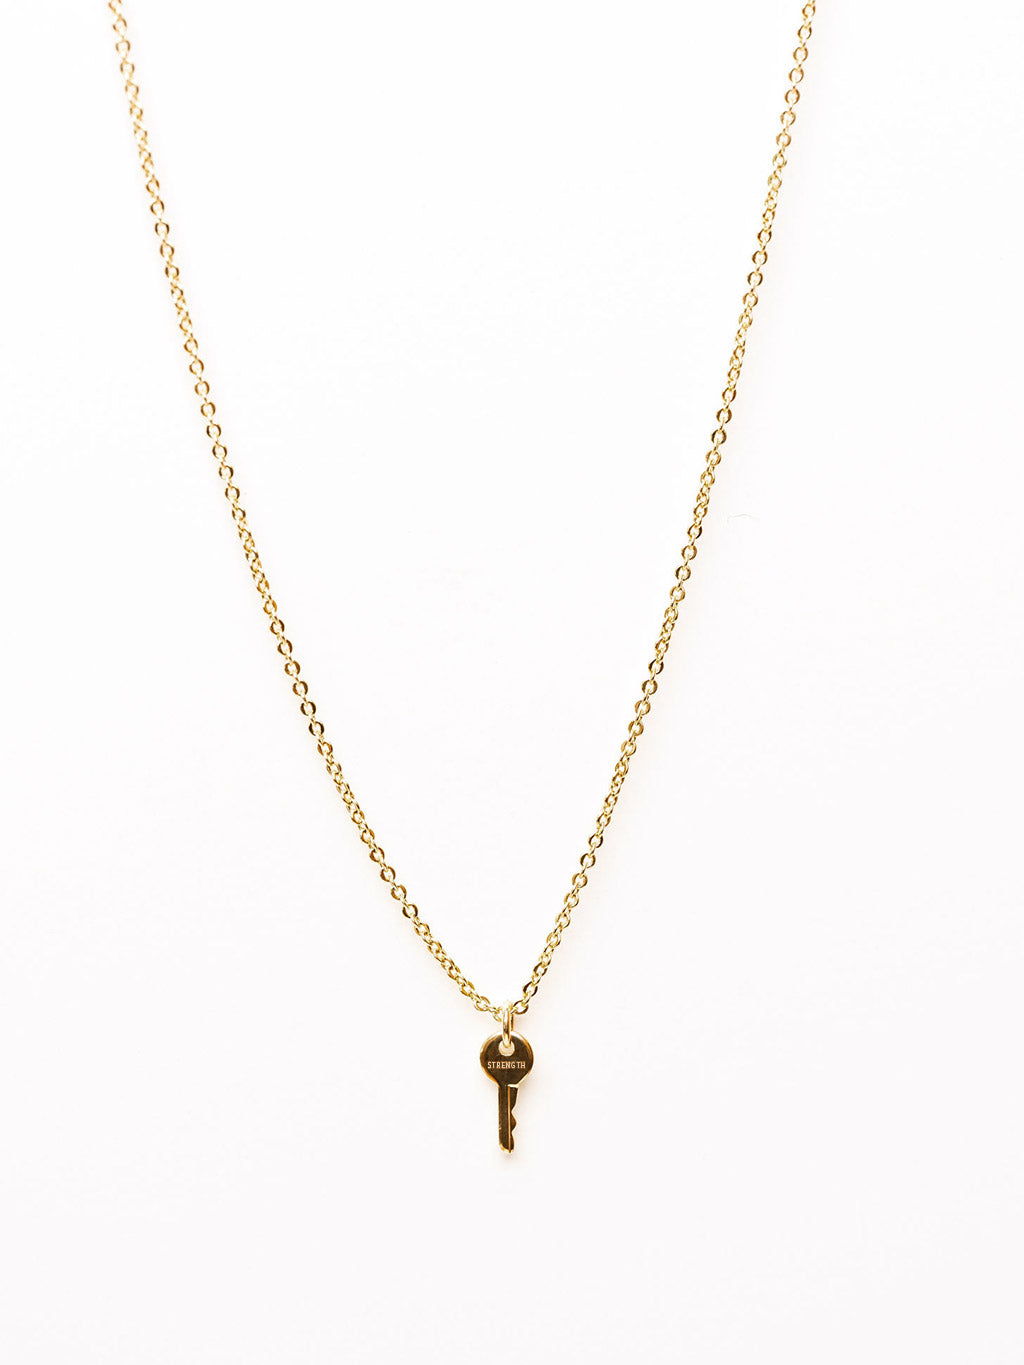 Mini Key Necklace Necklaces The Giving Keys STRENGTH Gold 